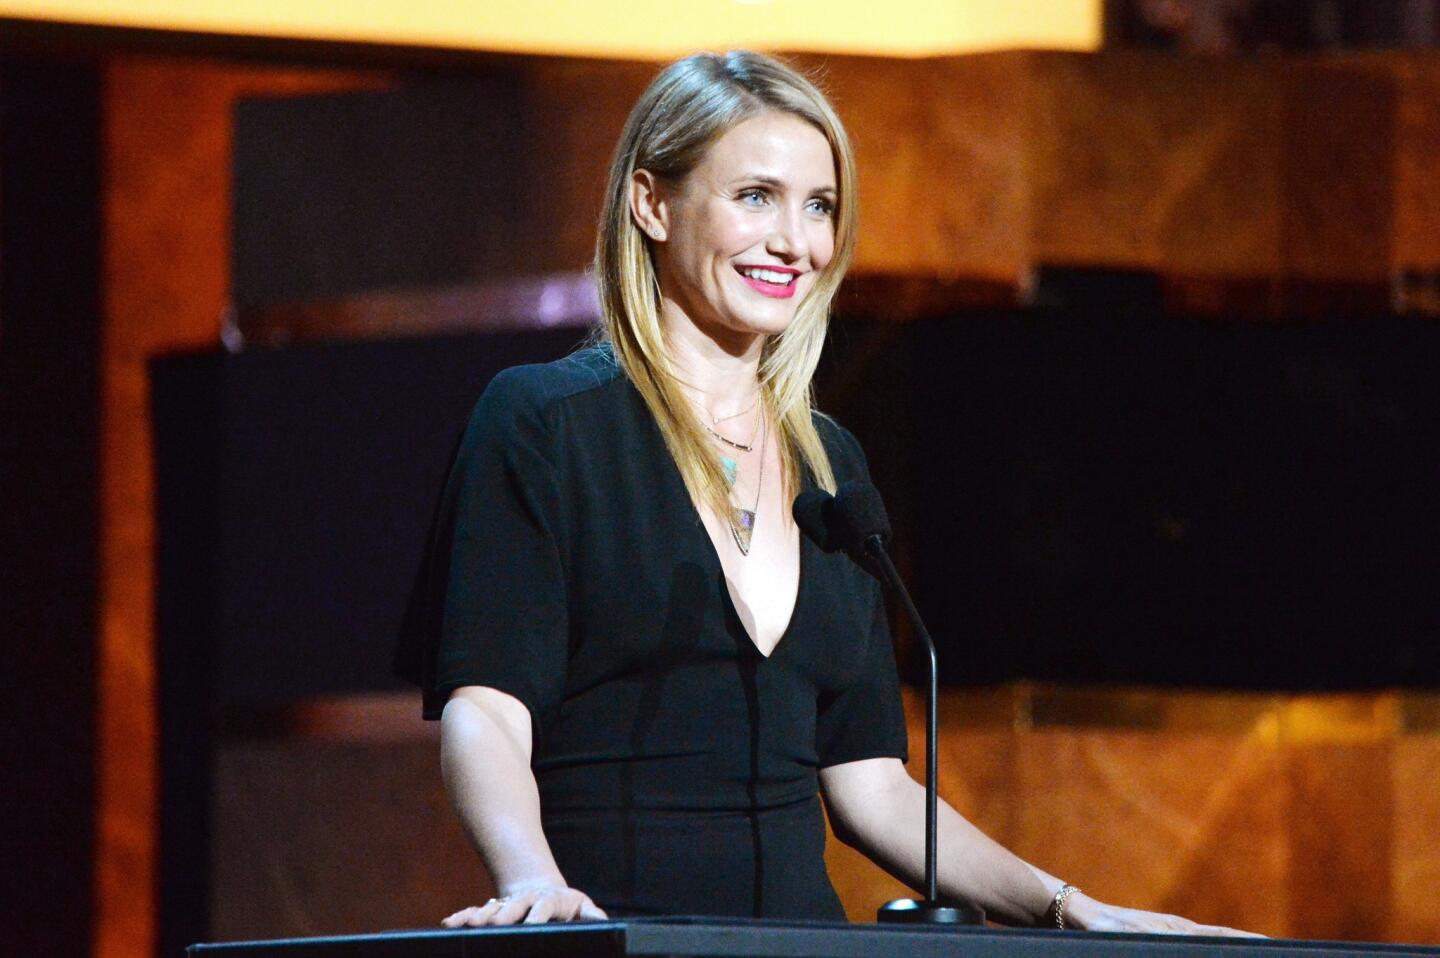 Cameron Diaz on 'Sex Tape': 'You see everything'